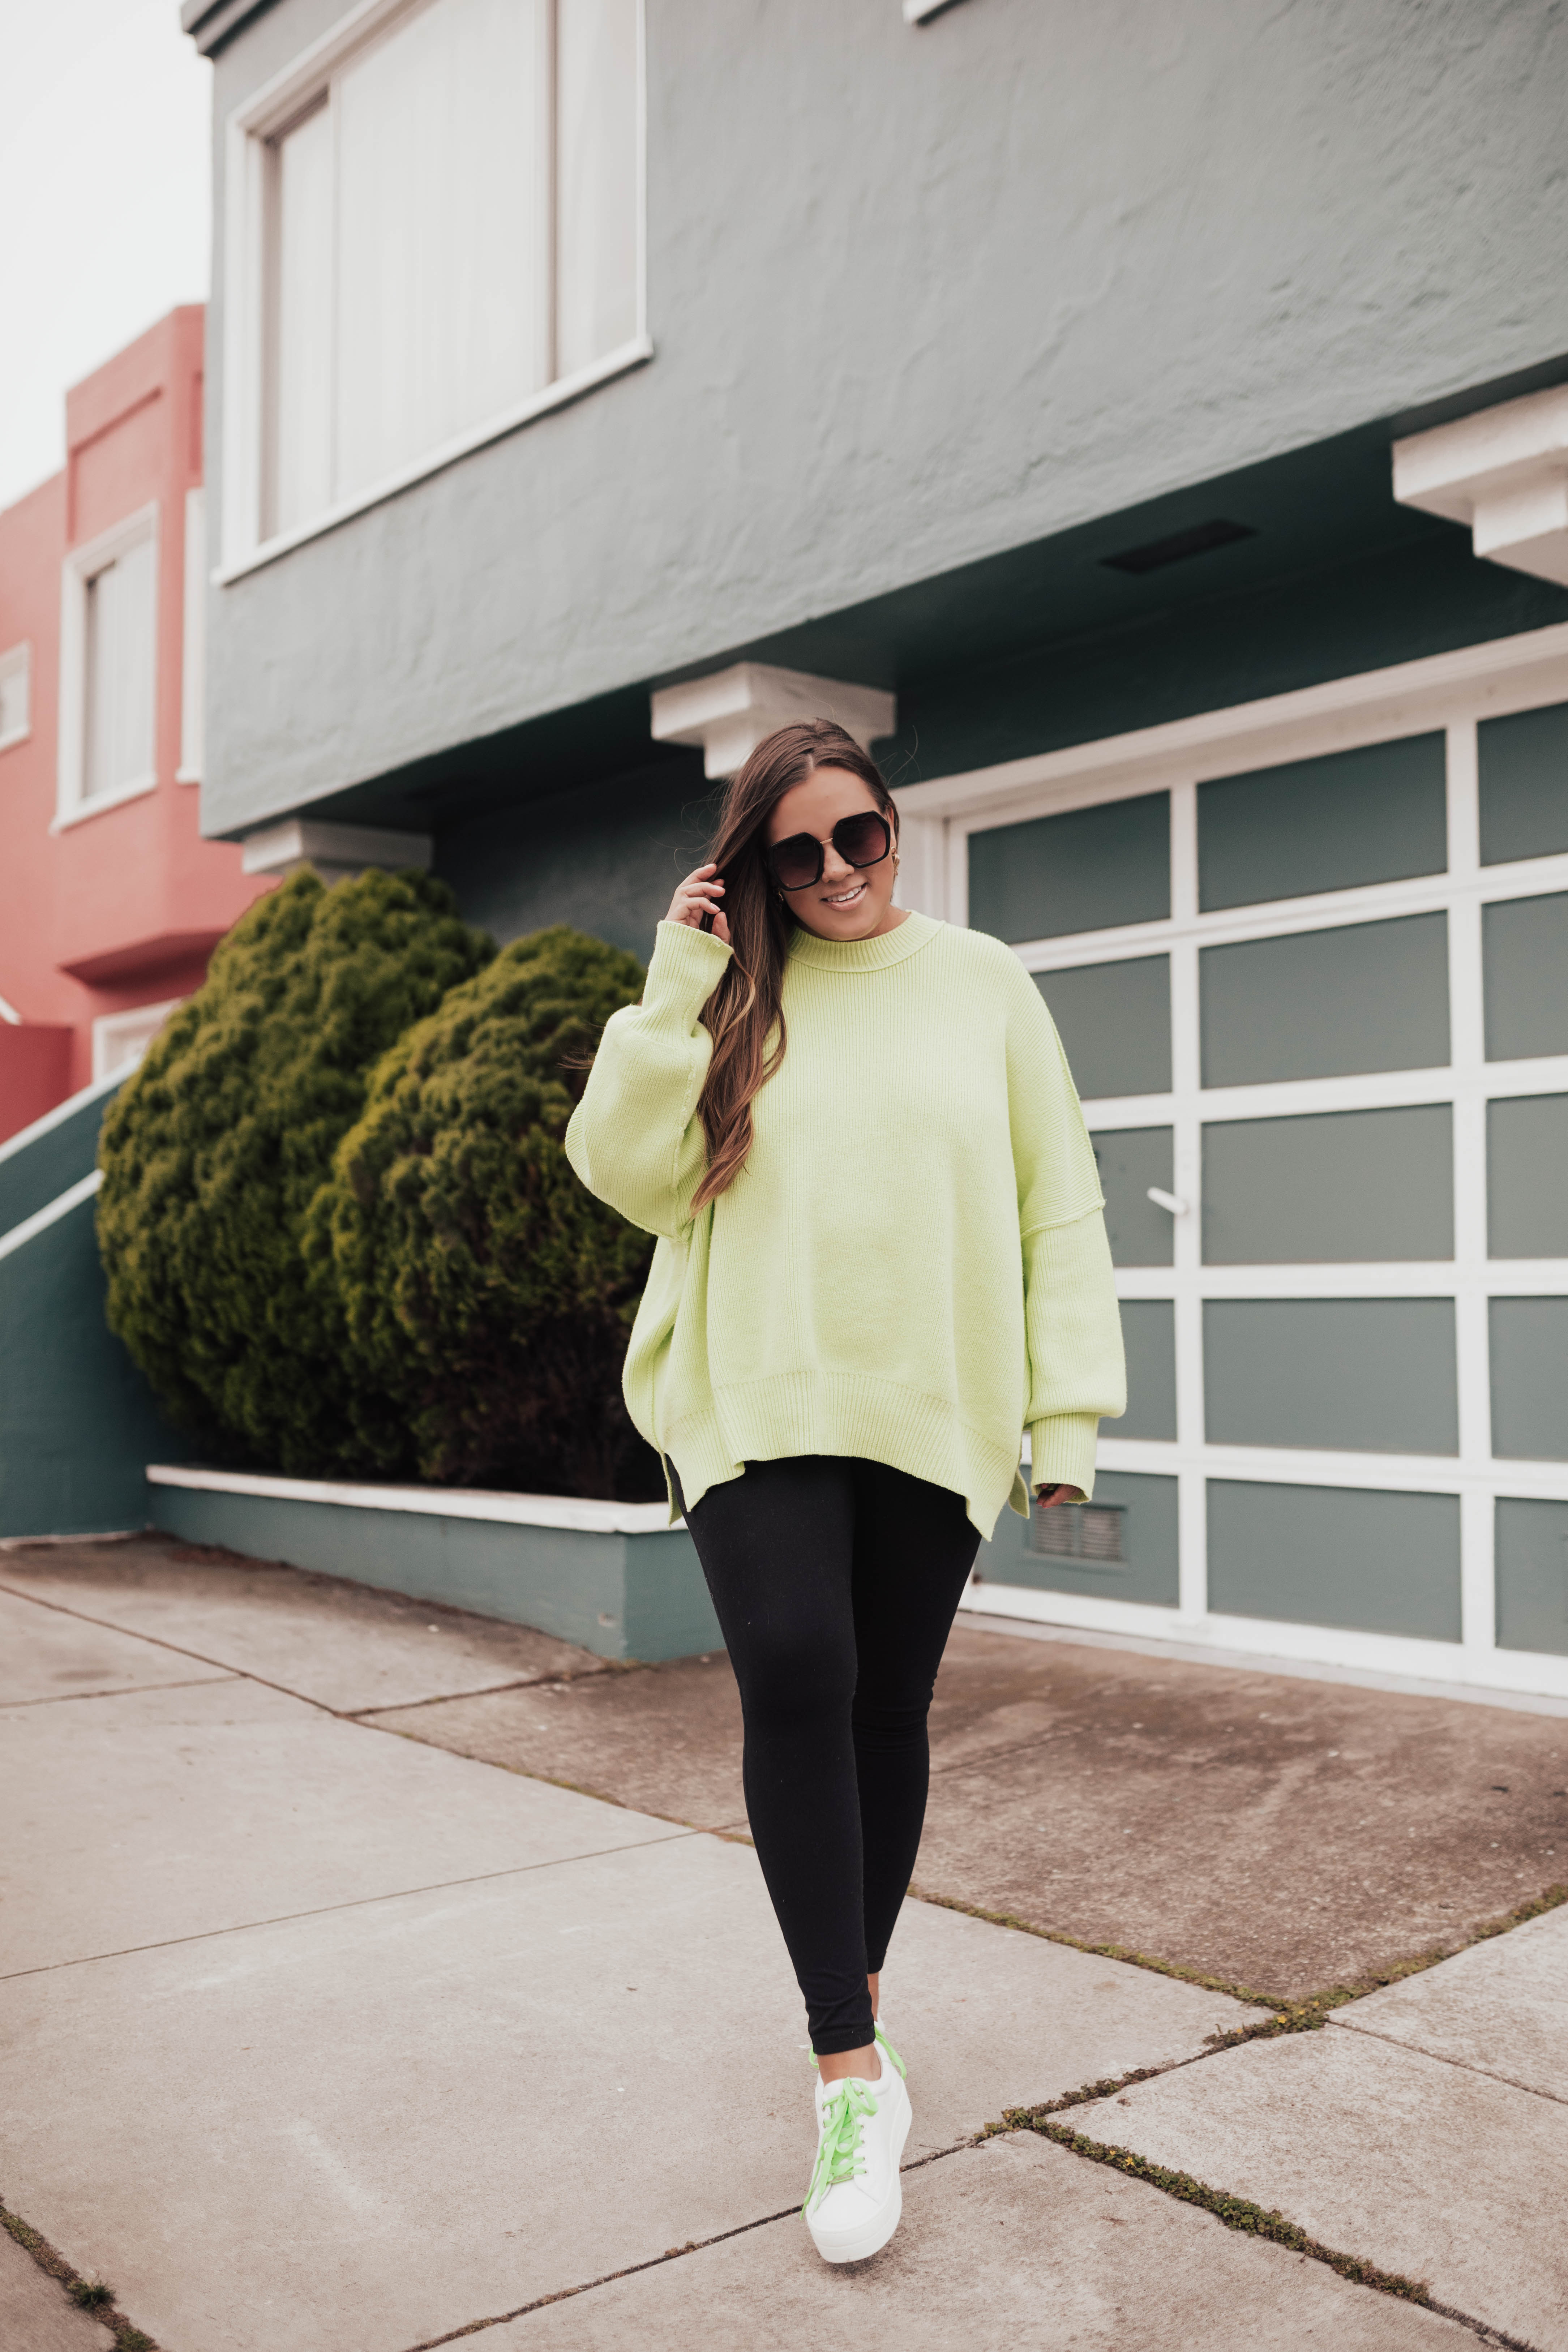 San Francisco blogger Ashley Zeal from Two Peas in a Prada shares her new sneakers from JSlides. She is wearing head to toe Zappos!